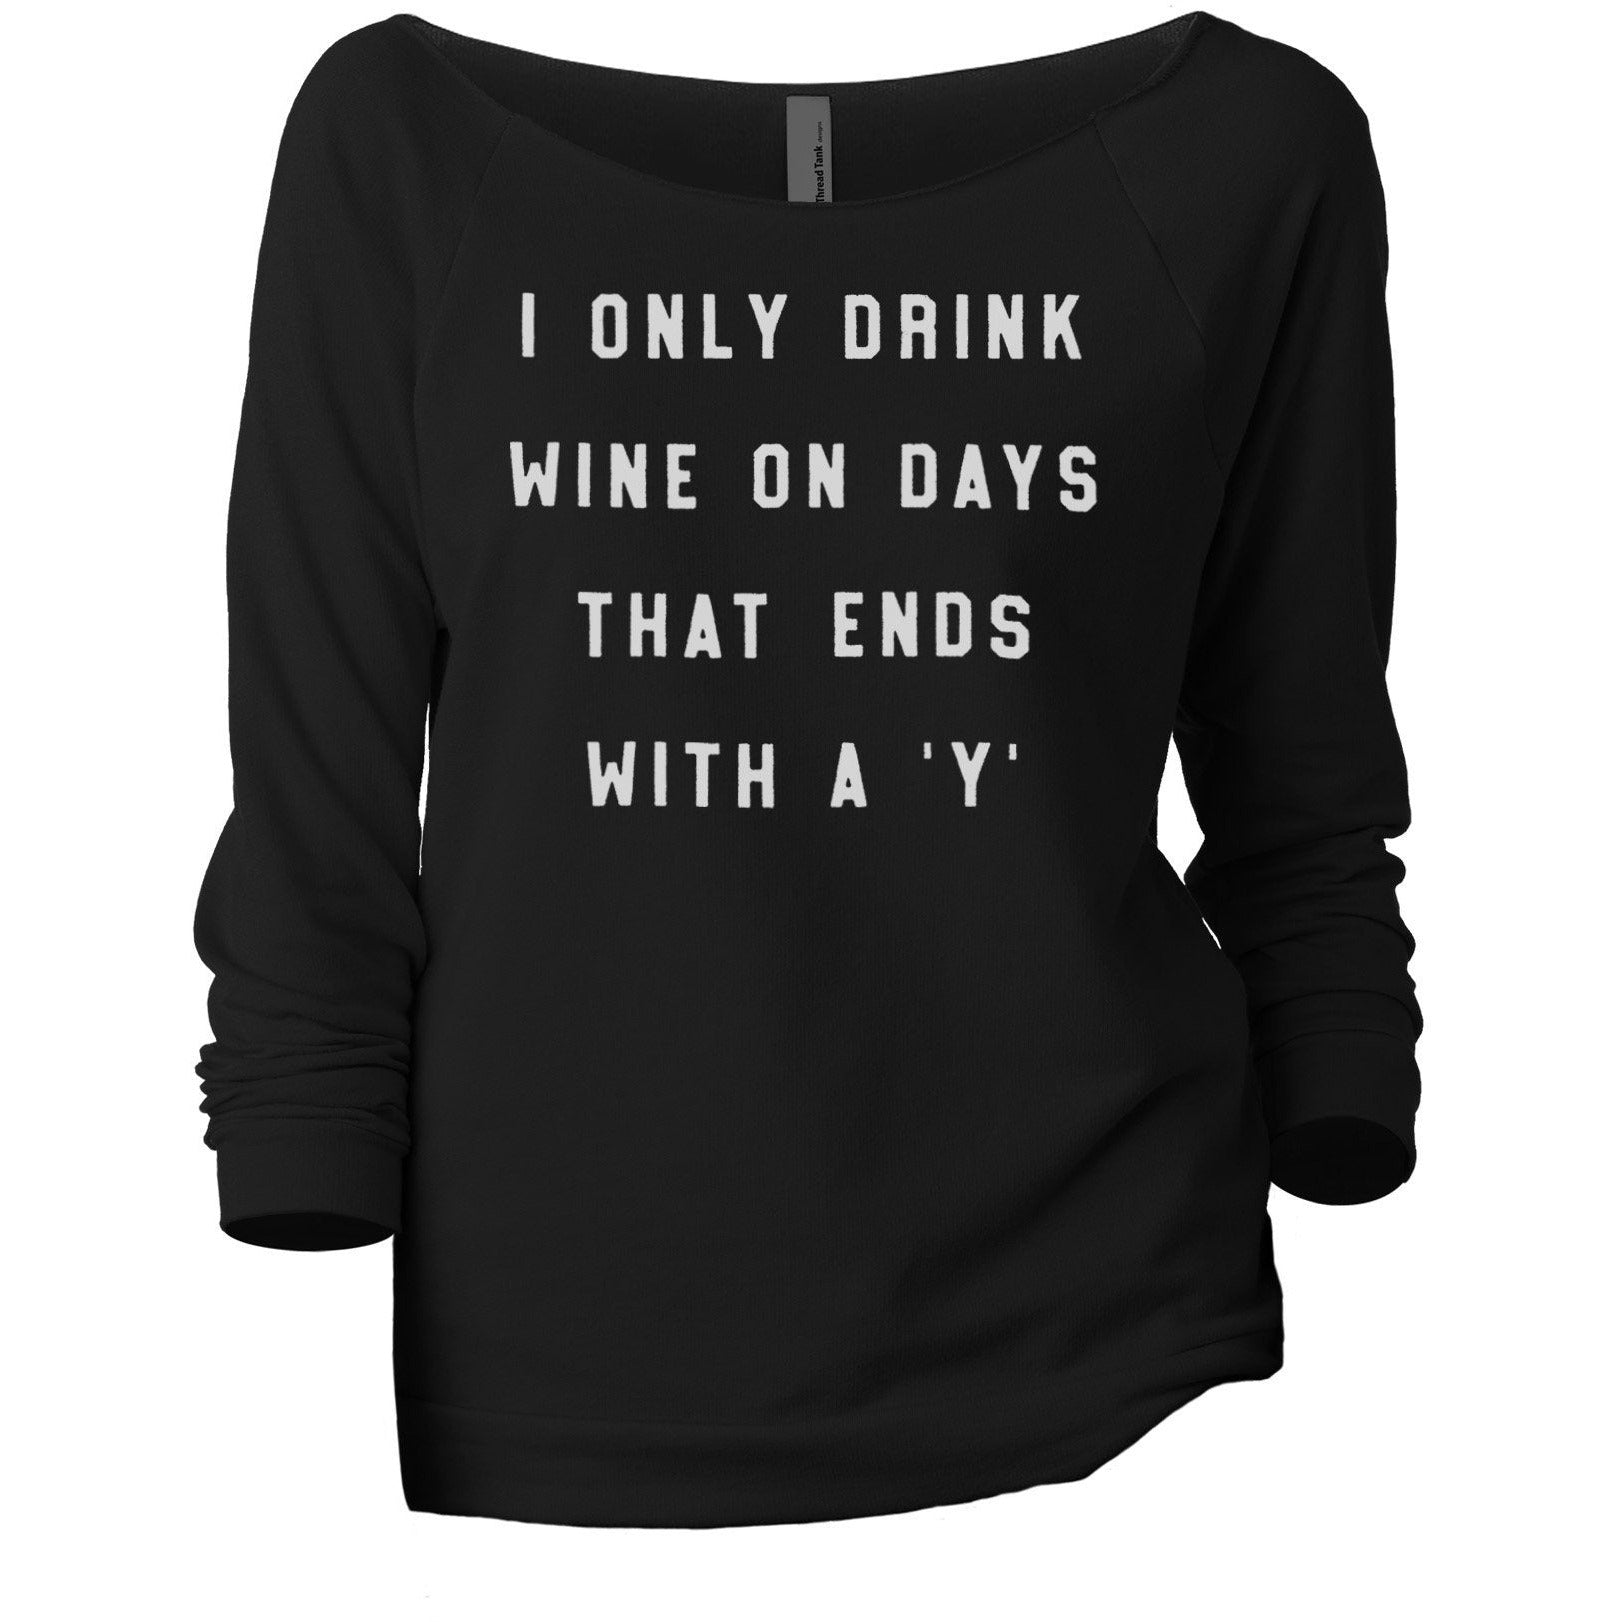 Drink Wine On Days Ends With Y Women's Graphic Printed Lightweight Slouchy 3/4 Sleeves Sweatshirt Black